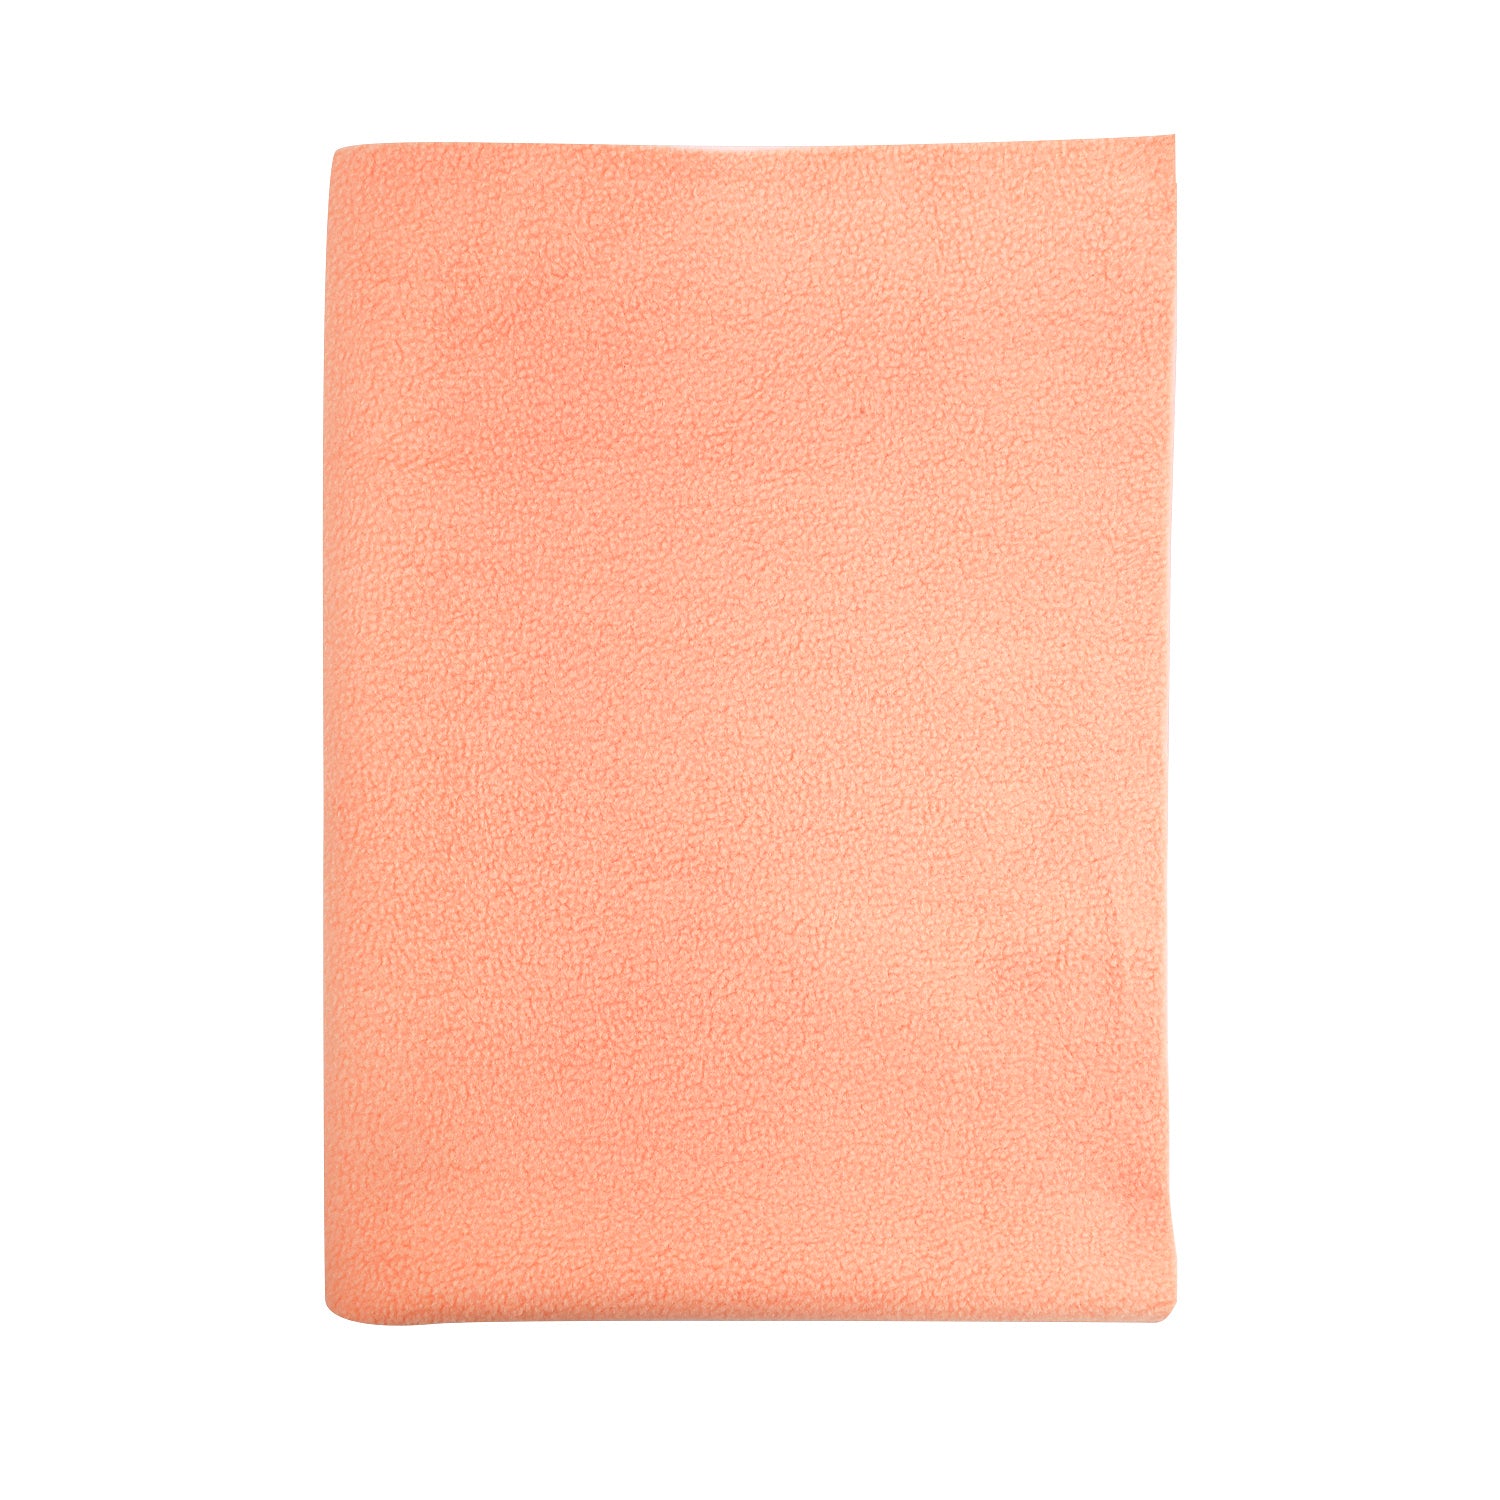 Plain Orange Water-Resistant Bed Protector - 3 Sizes - Baby Moo